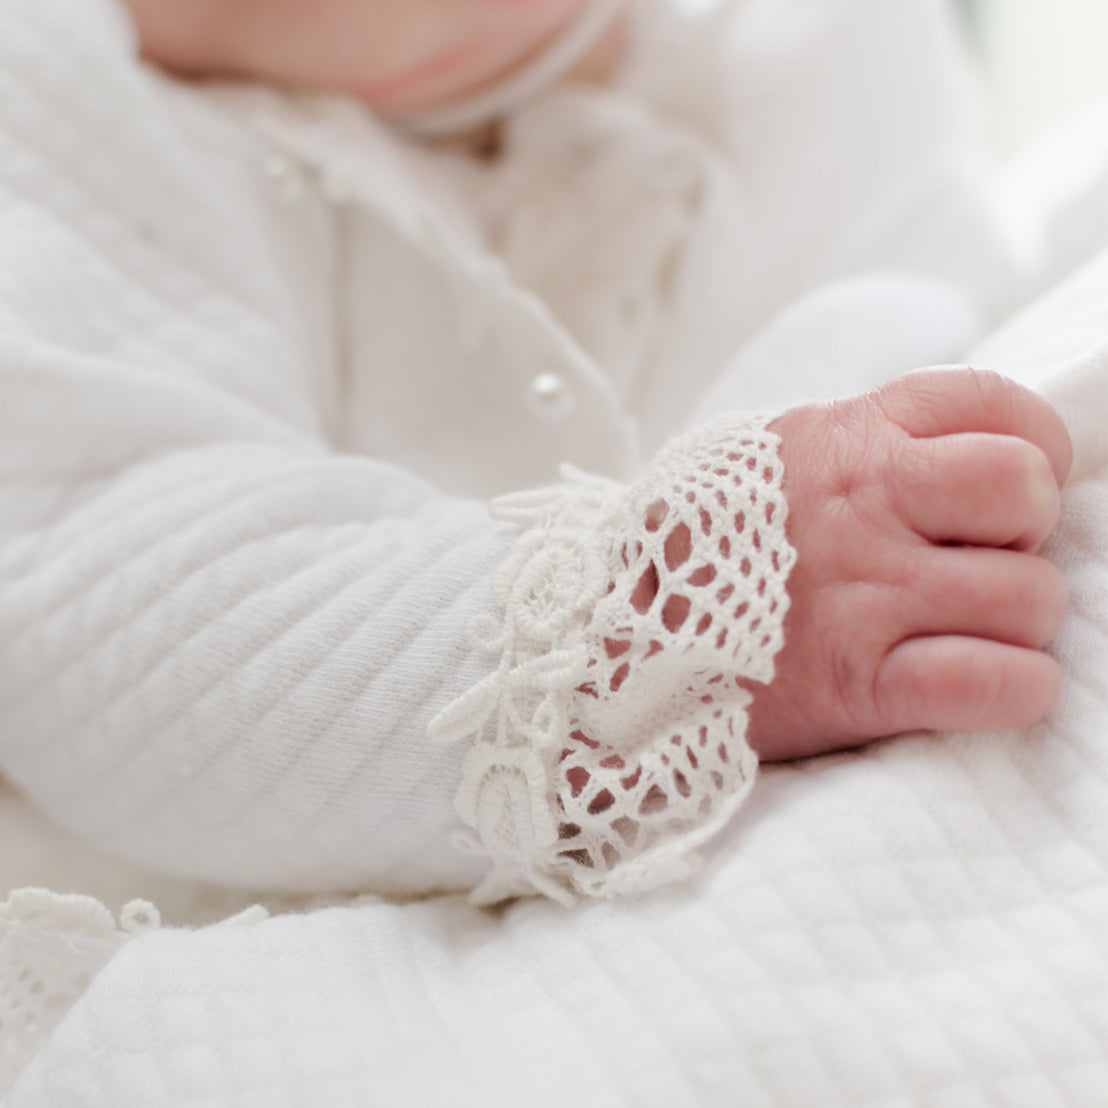 Baby's sleeve of the Lily Quilted Cotton Sweater showing the detail of the ivory cotton lace with rose and vine floral embroidery 